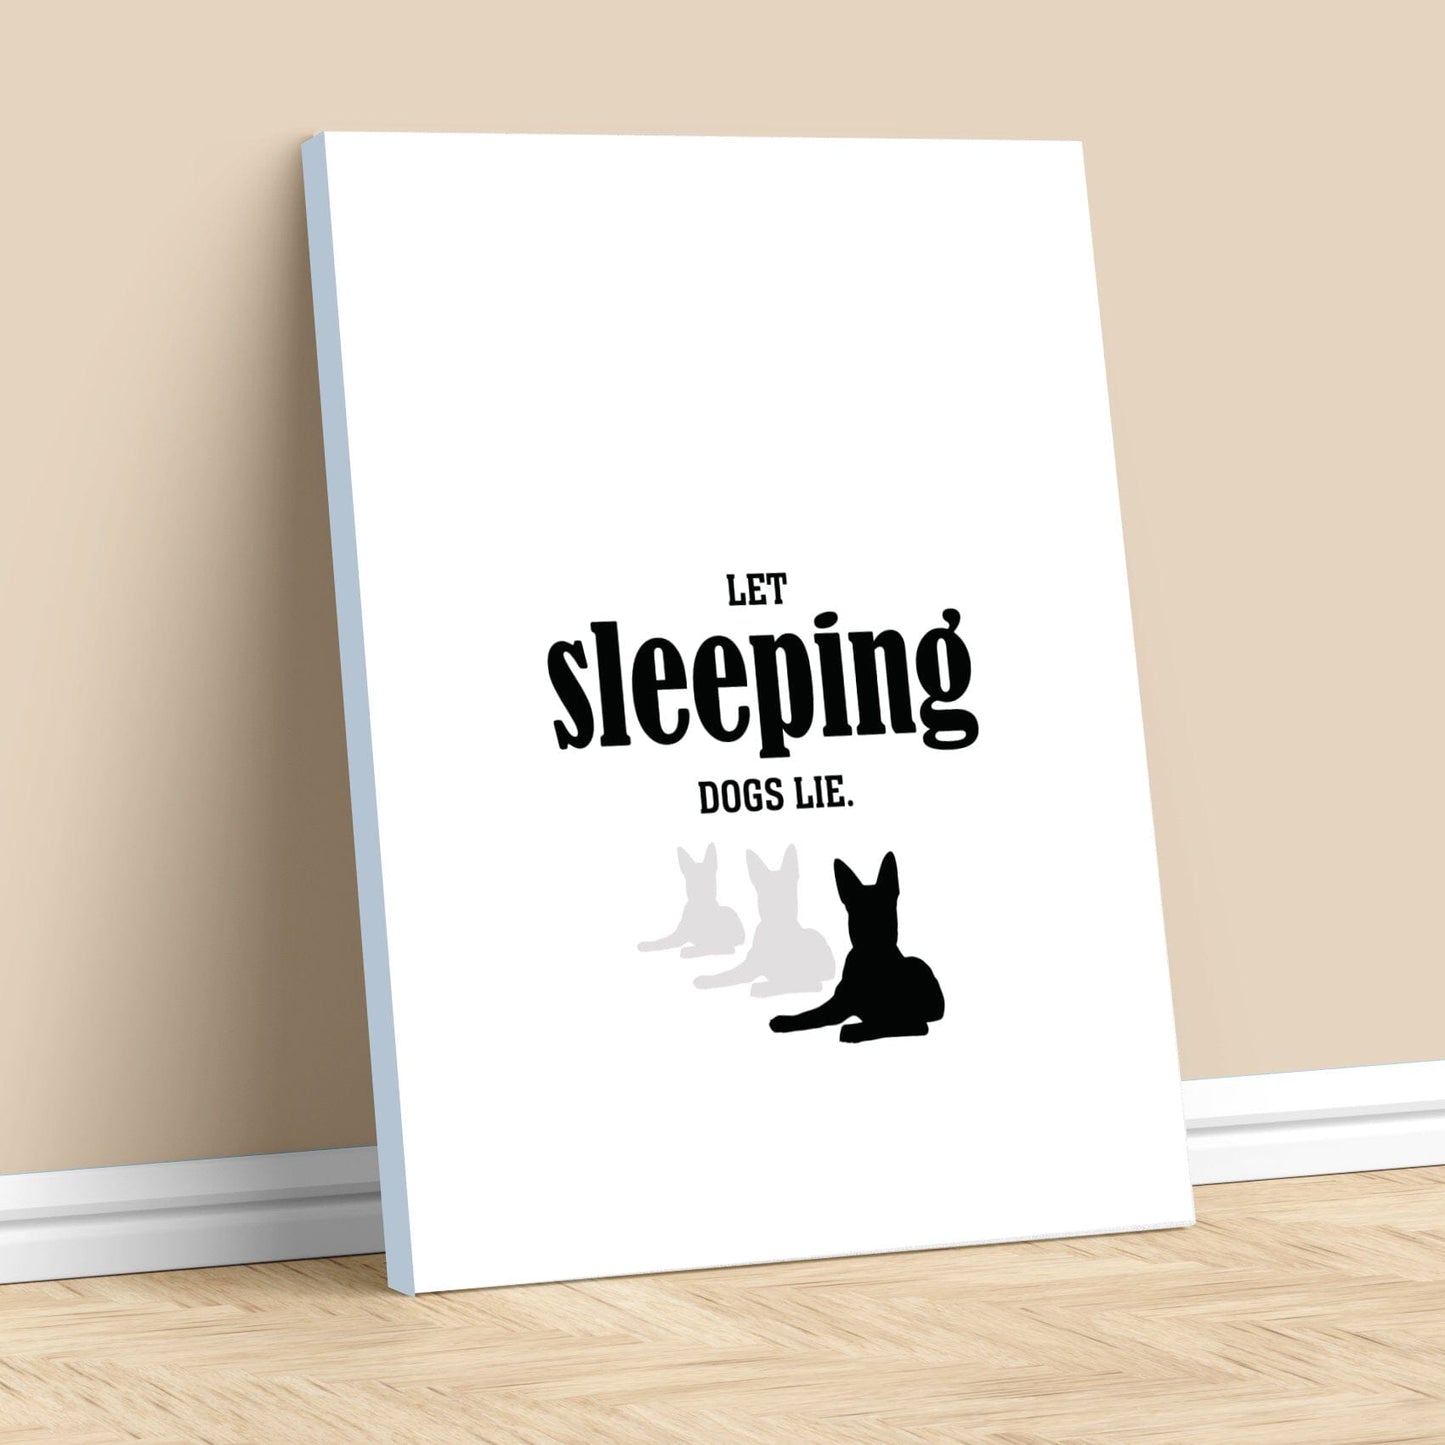 Let Sleeping Dogs Lie - Funny Wise and Witty Quote Wall Print Wise and Wiseass Quotes Song Lyrics Art 11x14 Canvas Wrap 